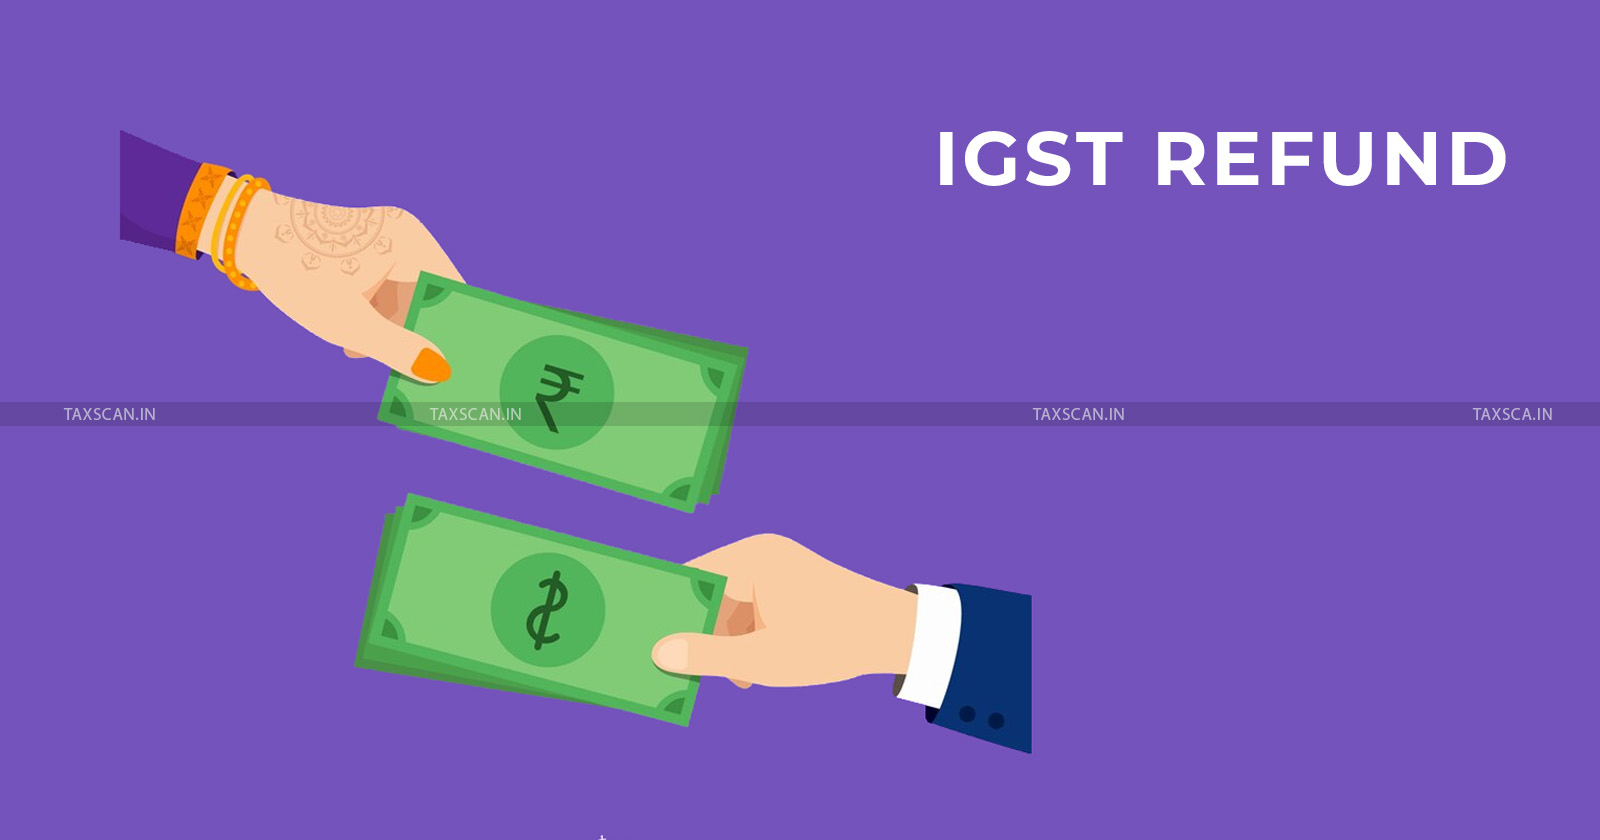 IGST - IGST Refund - GST - Customs Brokers - Customs Commissioner Delhi - Special Drive for Exporters - Refund - TAXSCAN